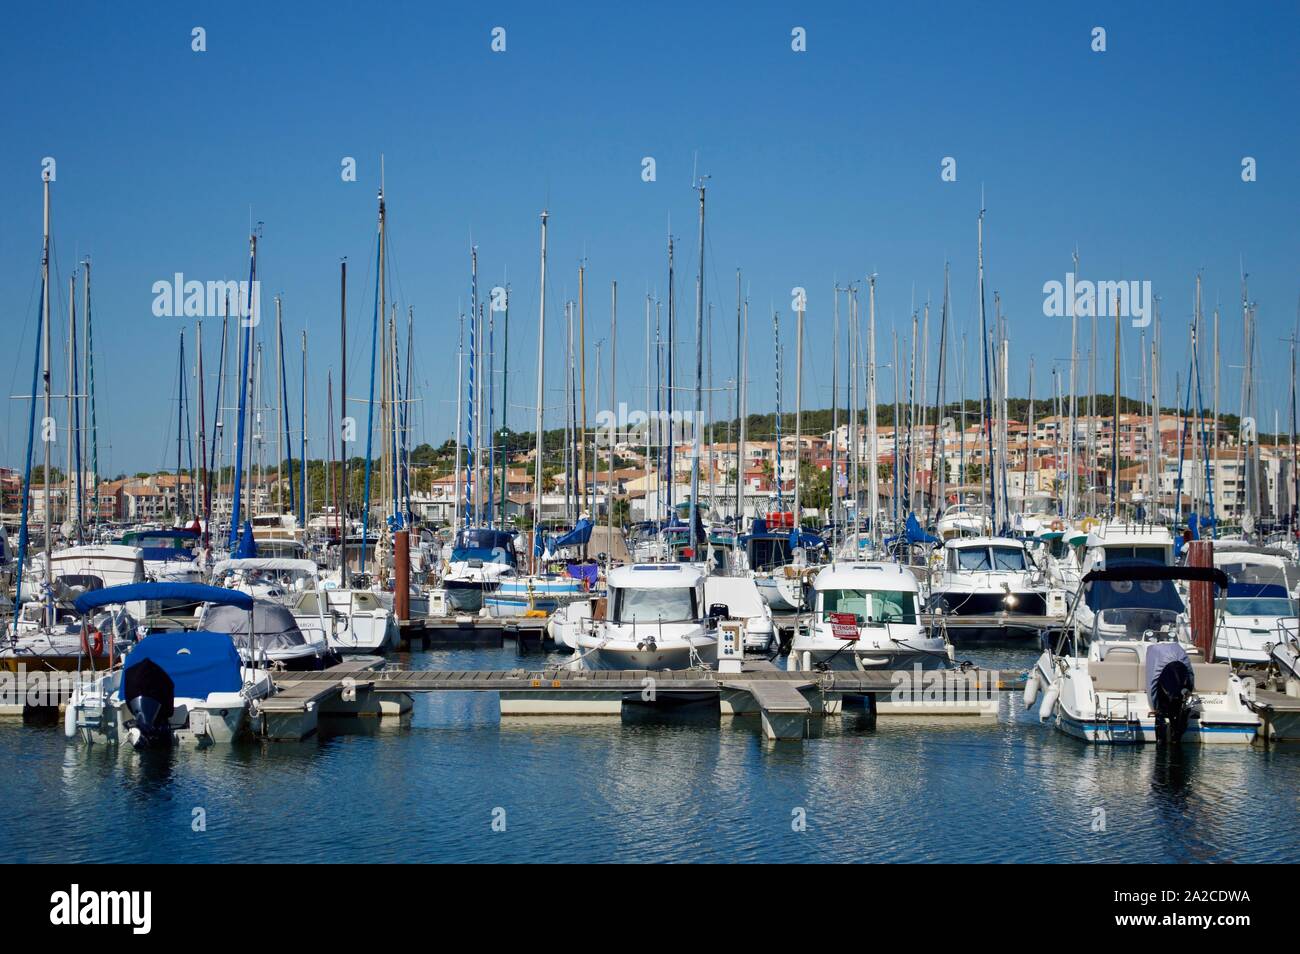 Yachts docked at a port in Cap d'Agde, France Stock Photo